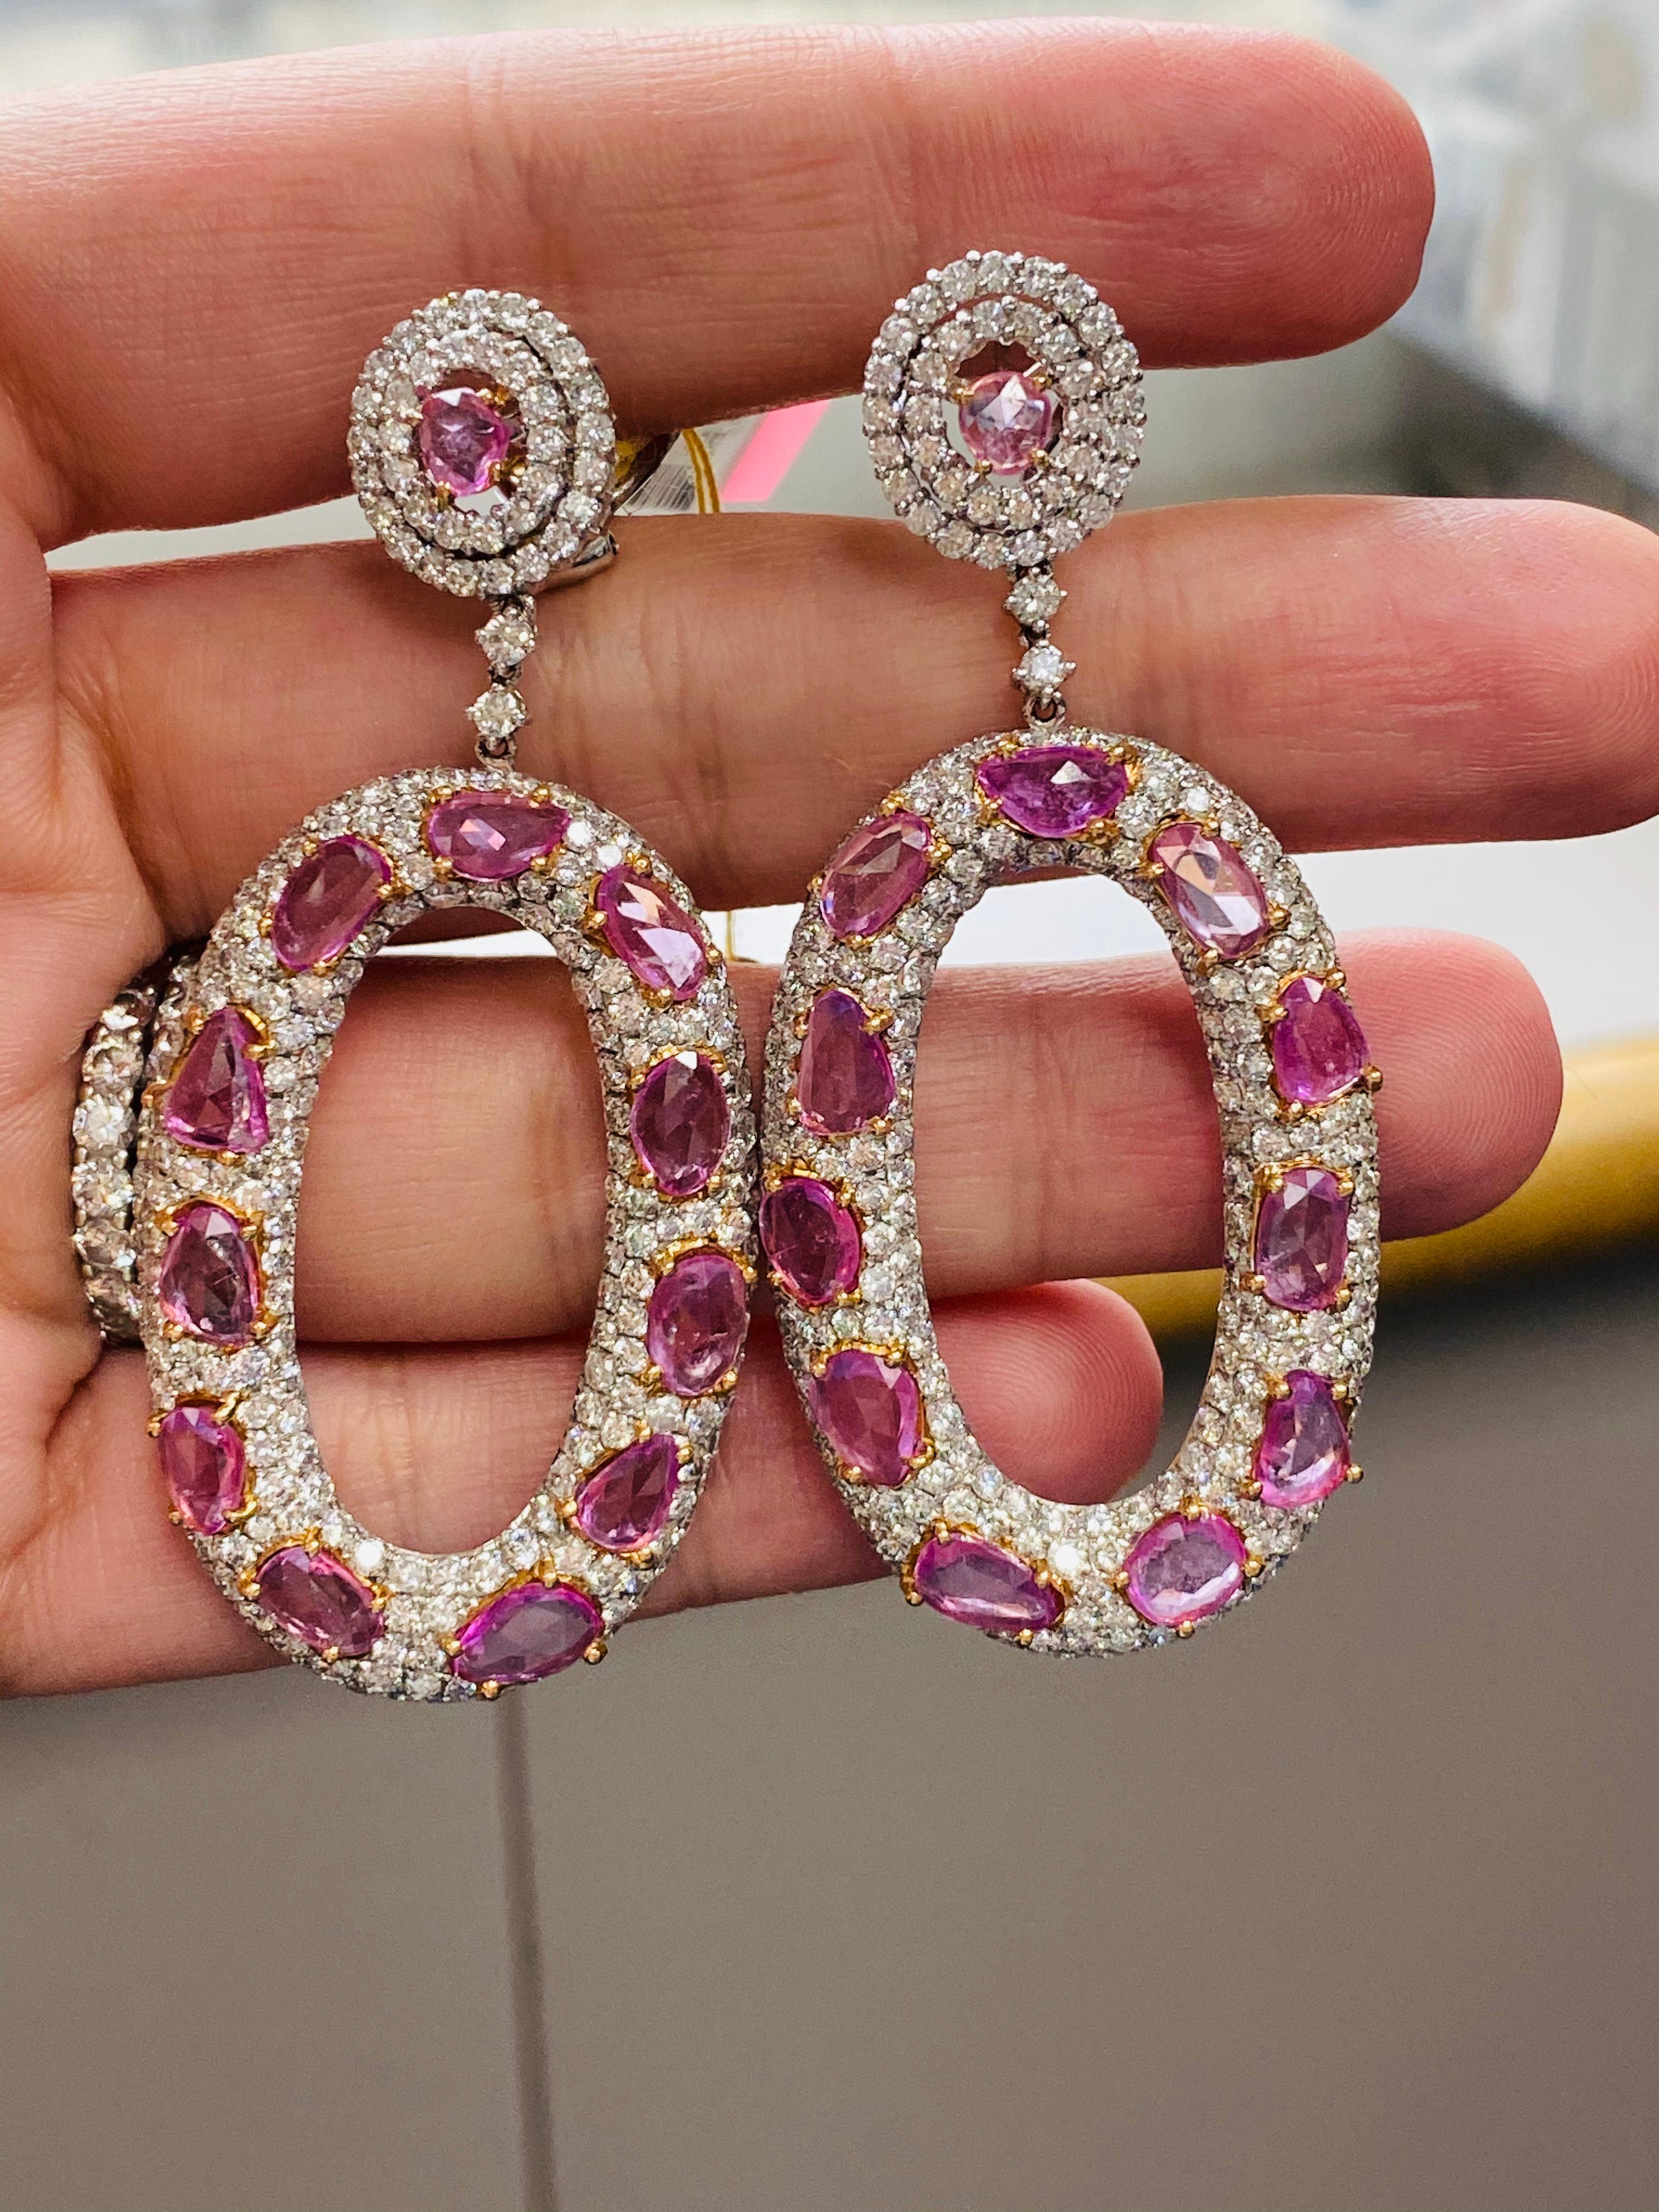 18K White gold pink sapphire and diamond oval shaped earrings, features 12.62 carats of natural pink sapphires surrounded by 10.85 carats of diamonds. 
